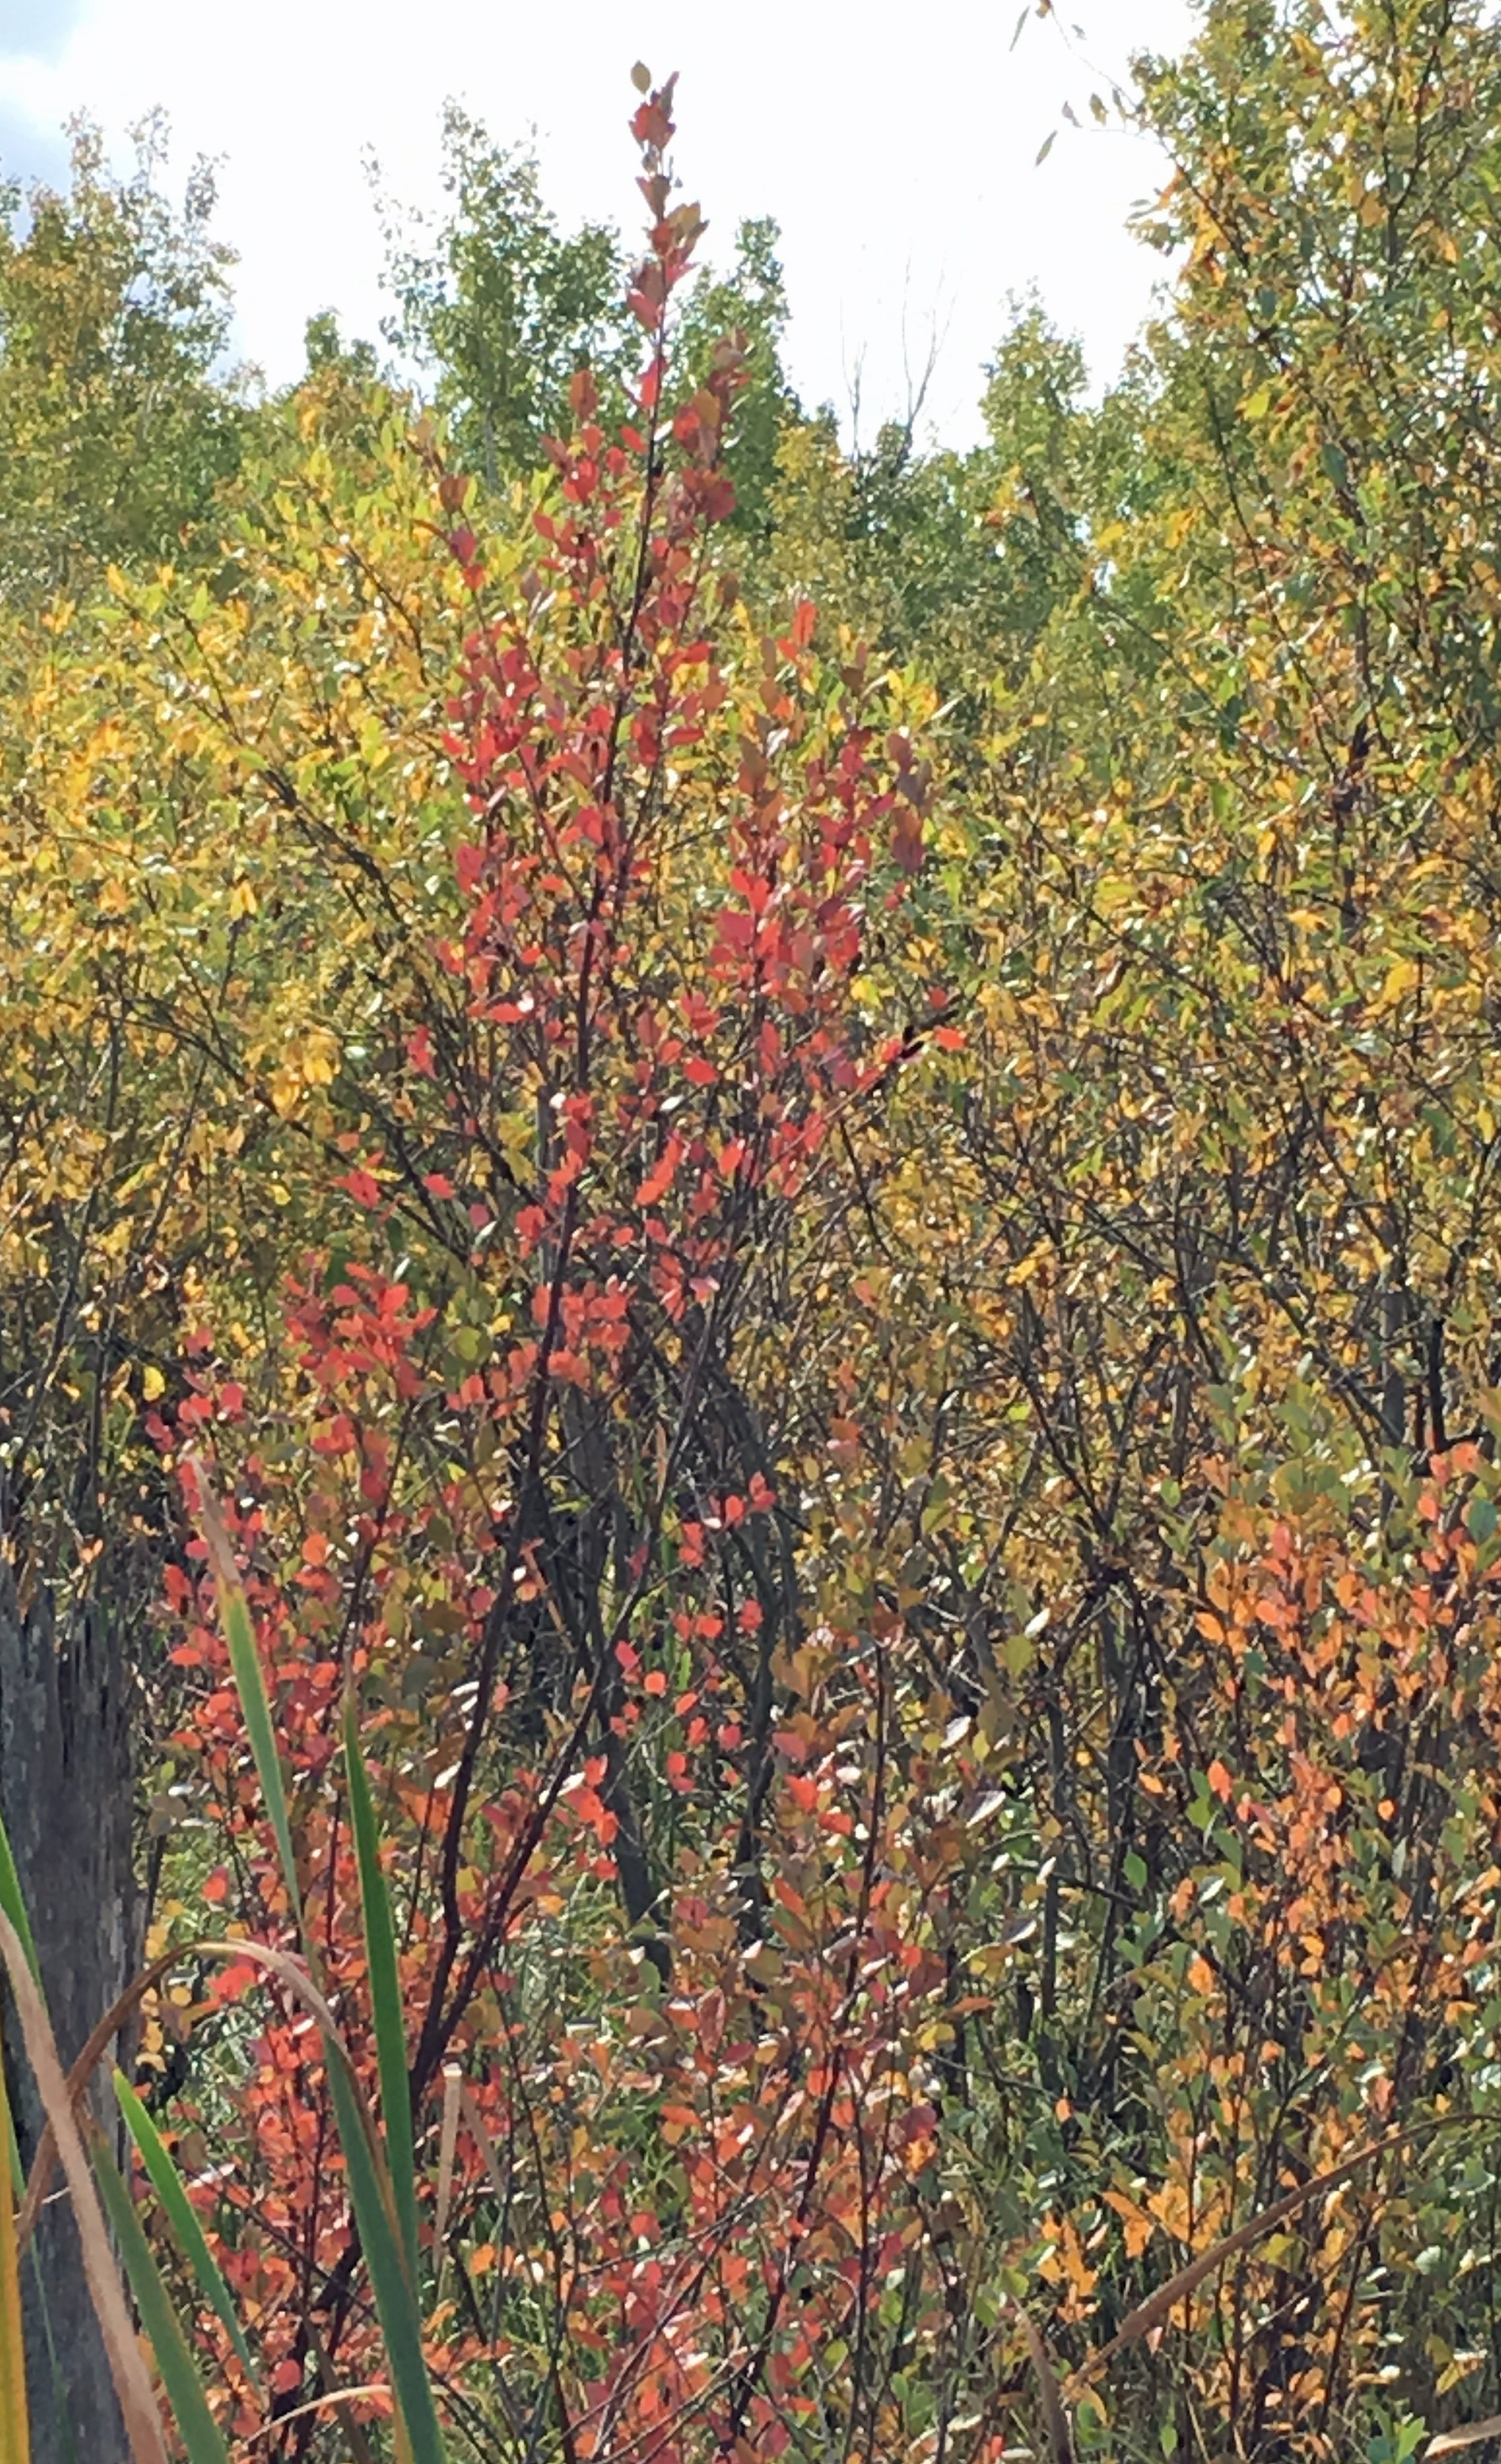 In our native forests, red fall colors are found on shrubs and some vines. (NDSU photo)